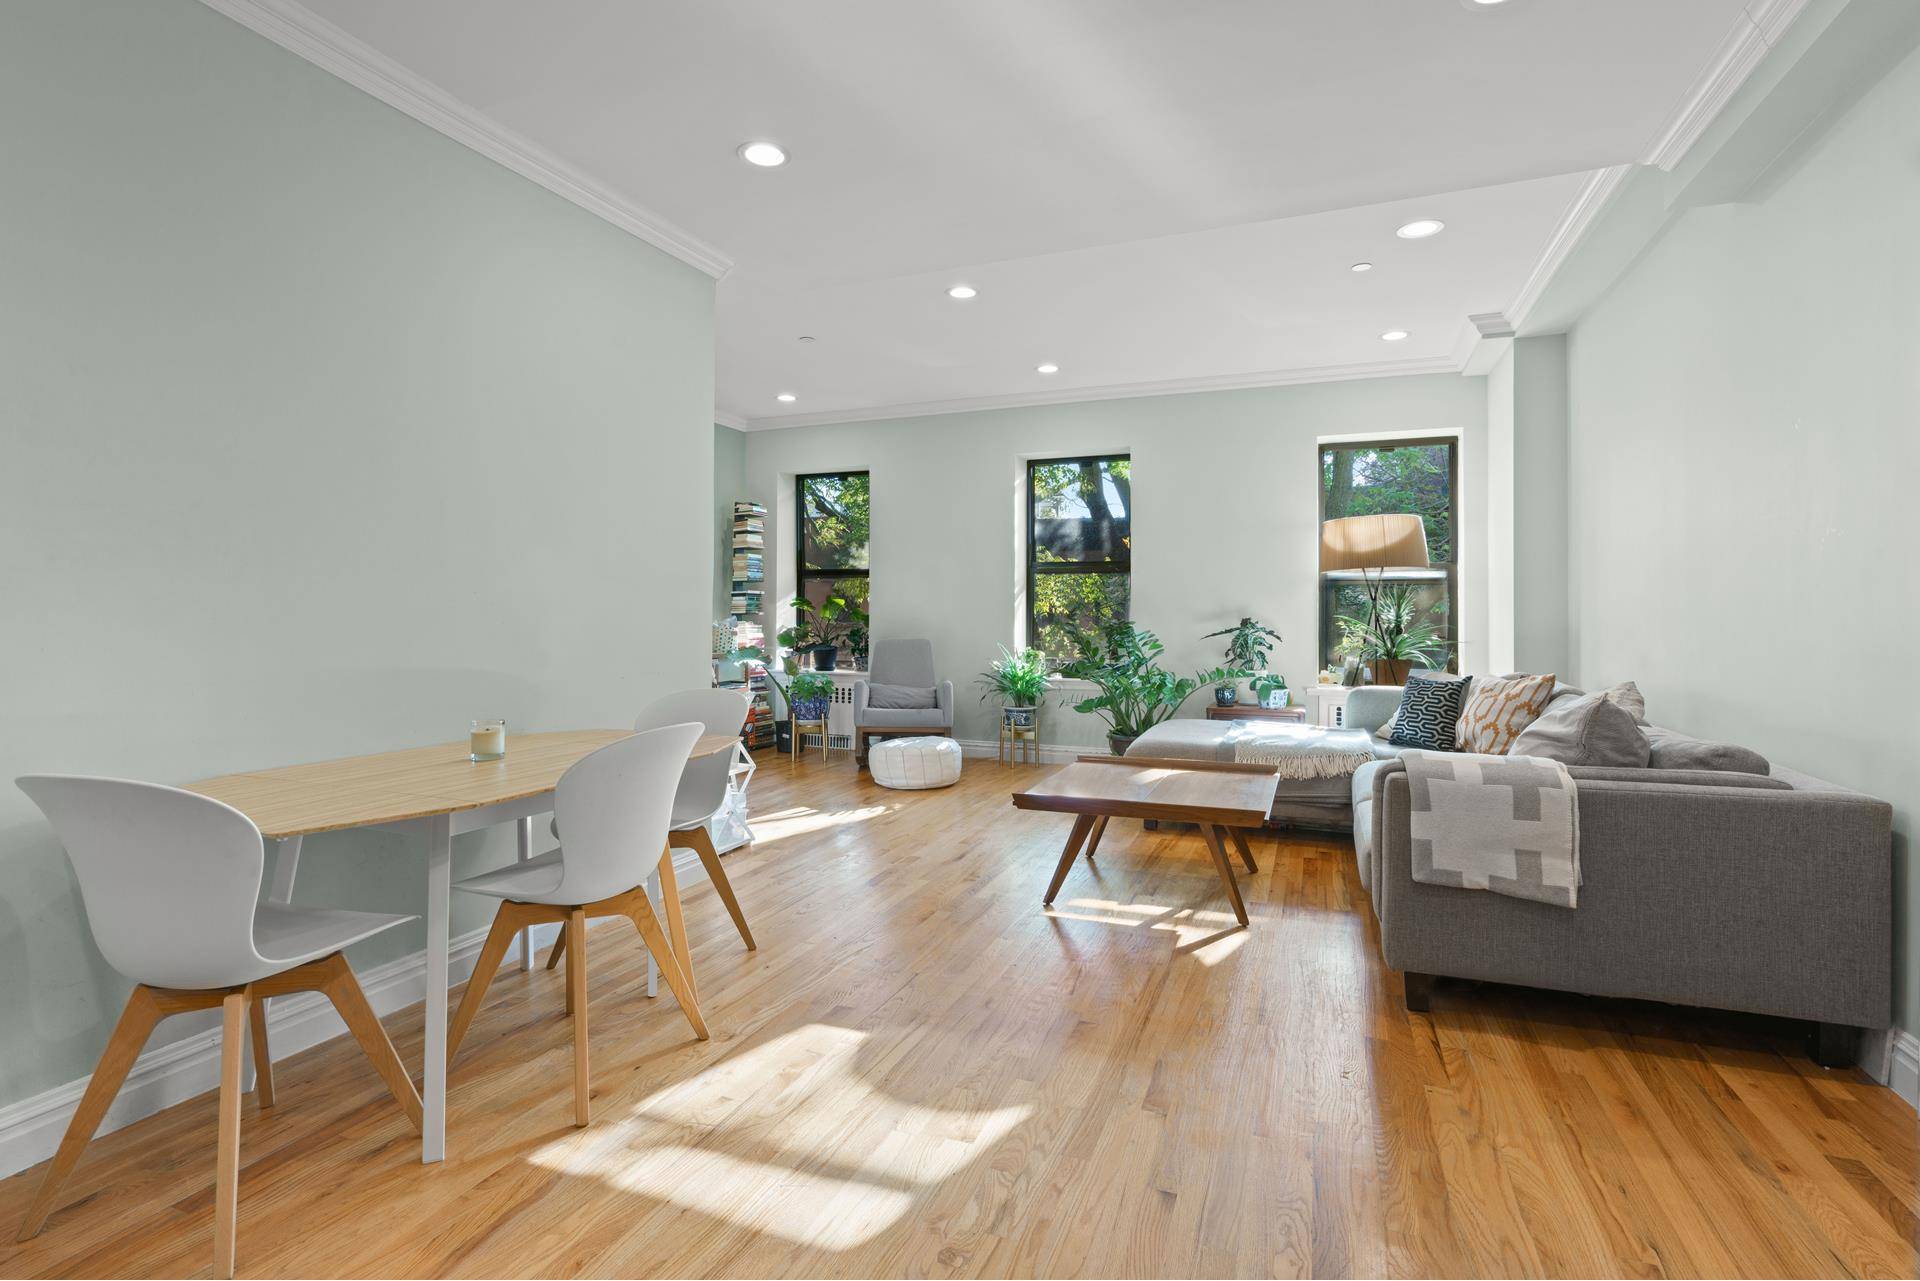 All of the charm of living in a 1910 Park Slope brownstone yet completely renovated for today's lifestyle needs !